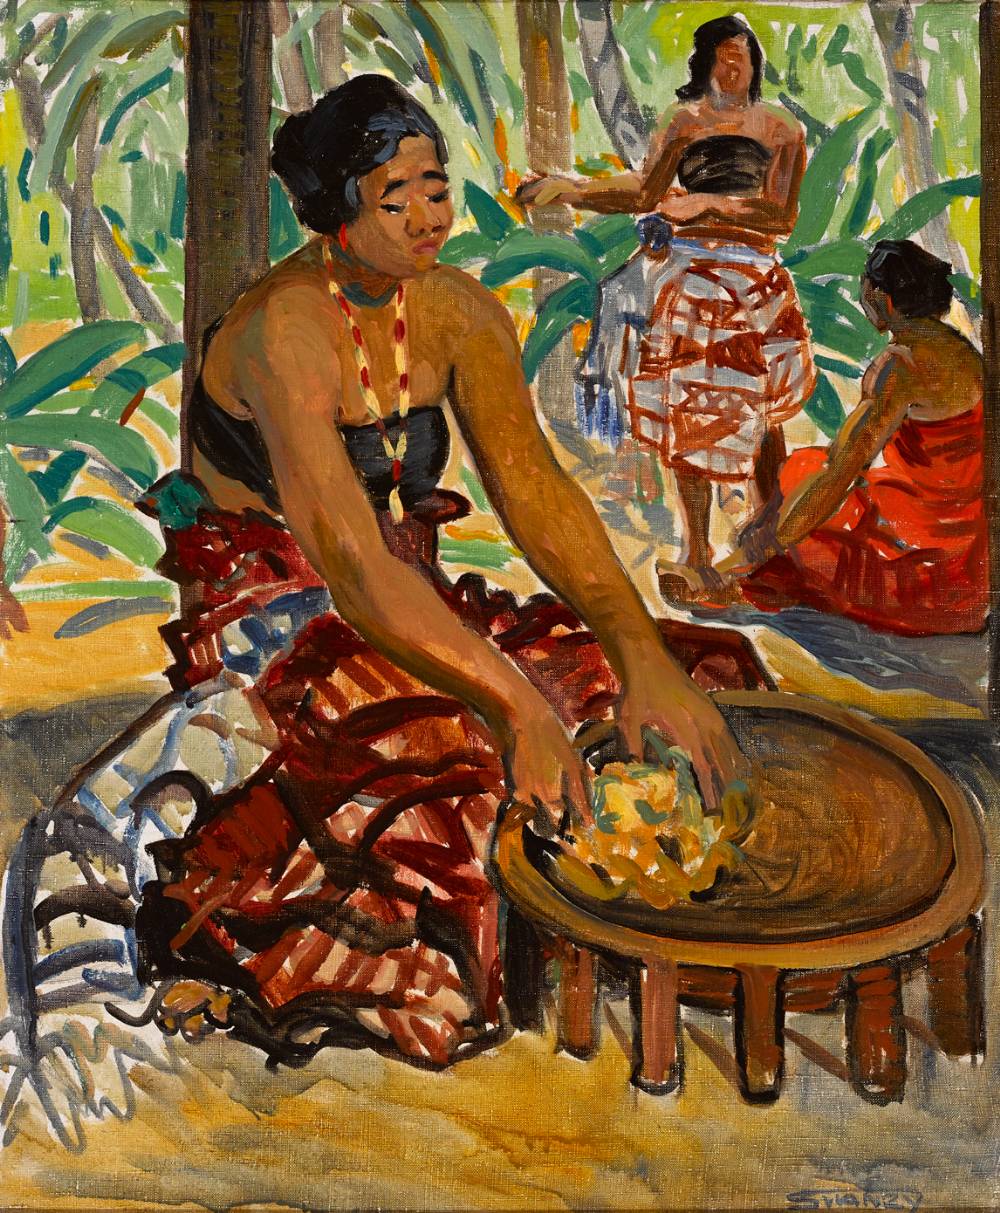 PREPARING THE MEAL, SAMOA, c. 1919-25 by Mary Swanzy HRHA (1882-1978) at Whyte's Auctions